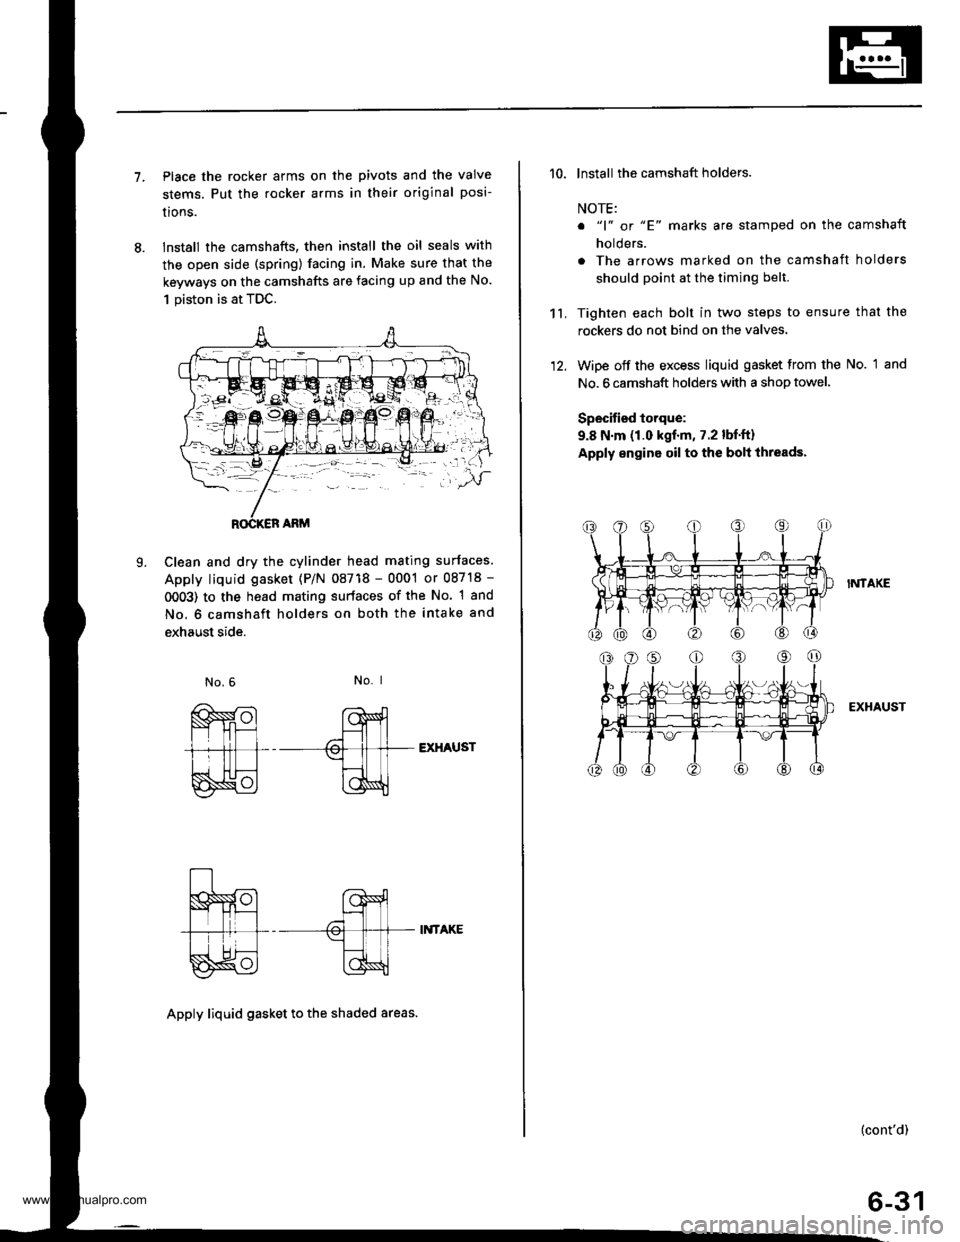 HONDA CR-V 1999 RD1-RD3 / 1.G Workshop Manual 
7.Place the rocker arms on the pivots and the valve
stems. Put the rocker arms in their original posi-
lrons.
lnstall the camshafts, then install the oil seals with
the open side (spring) facing in. 